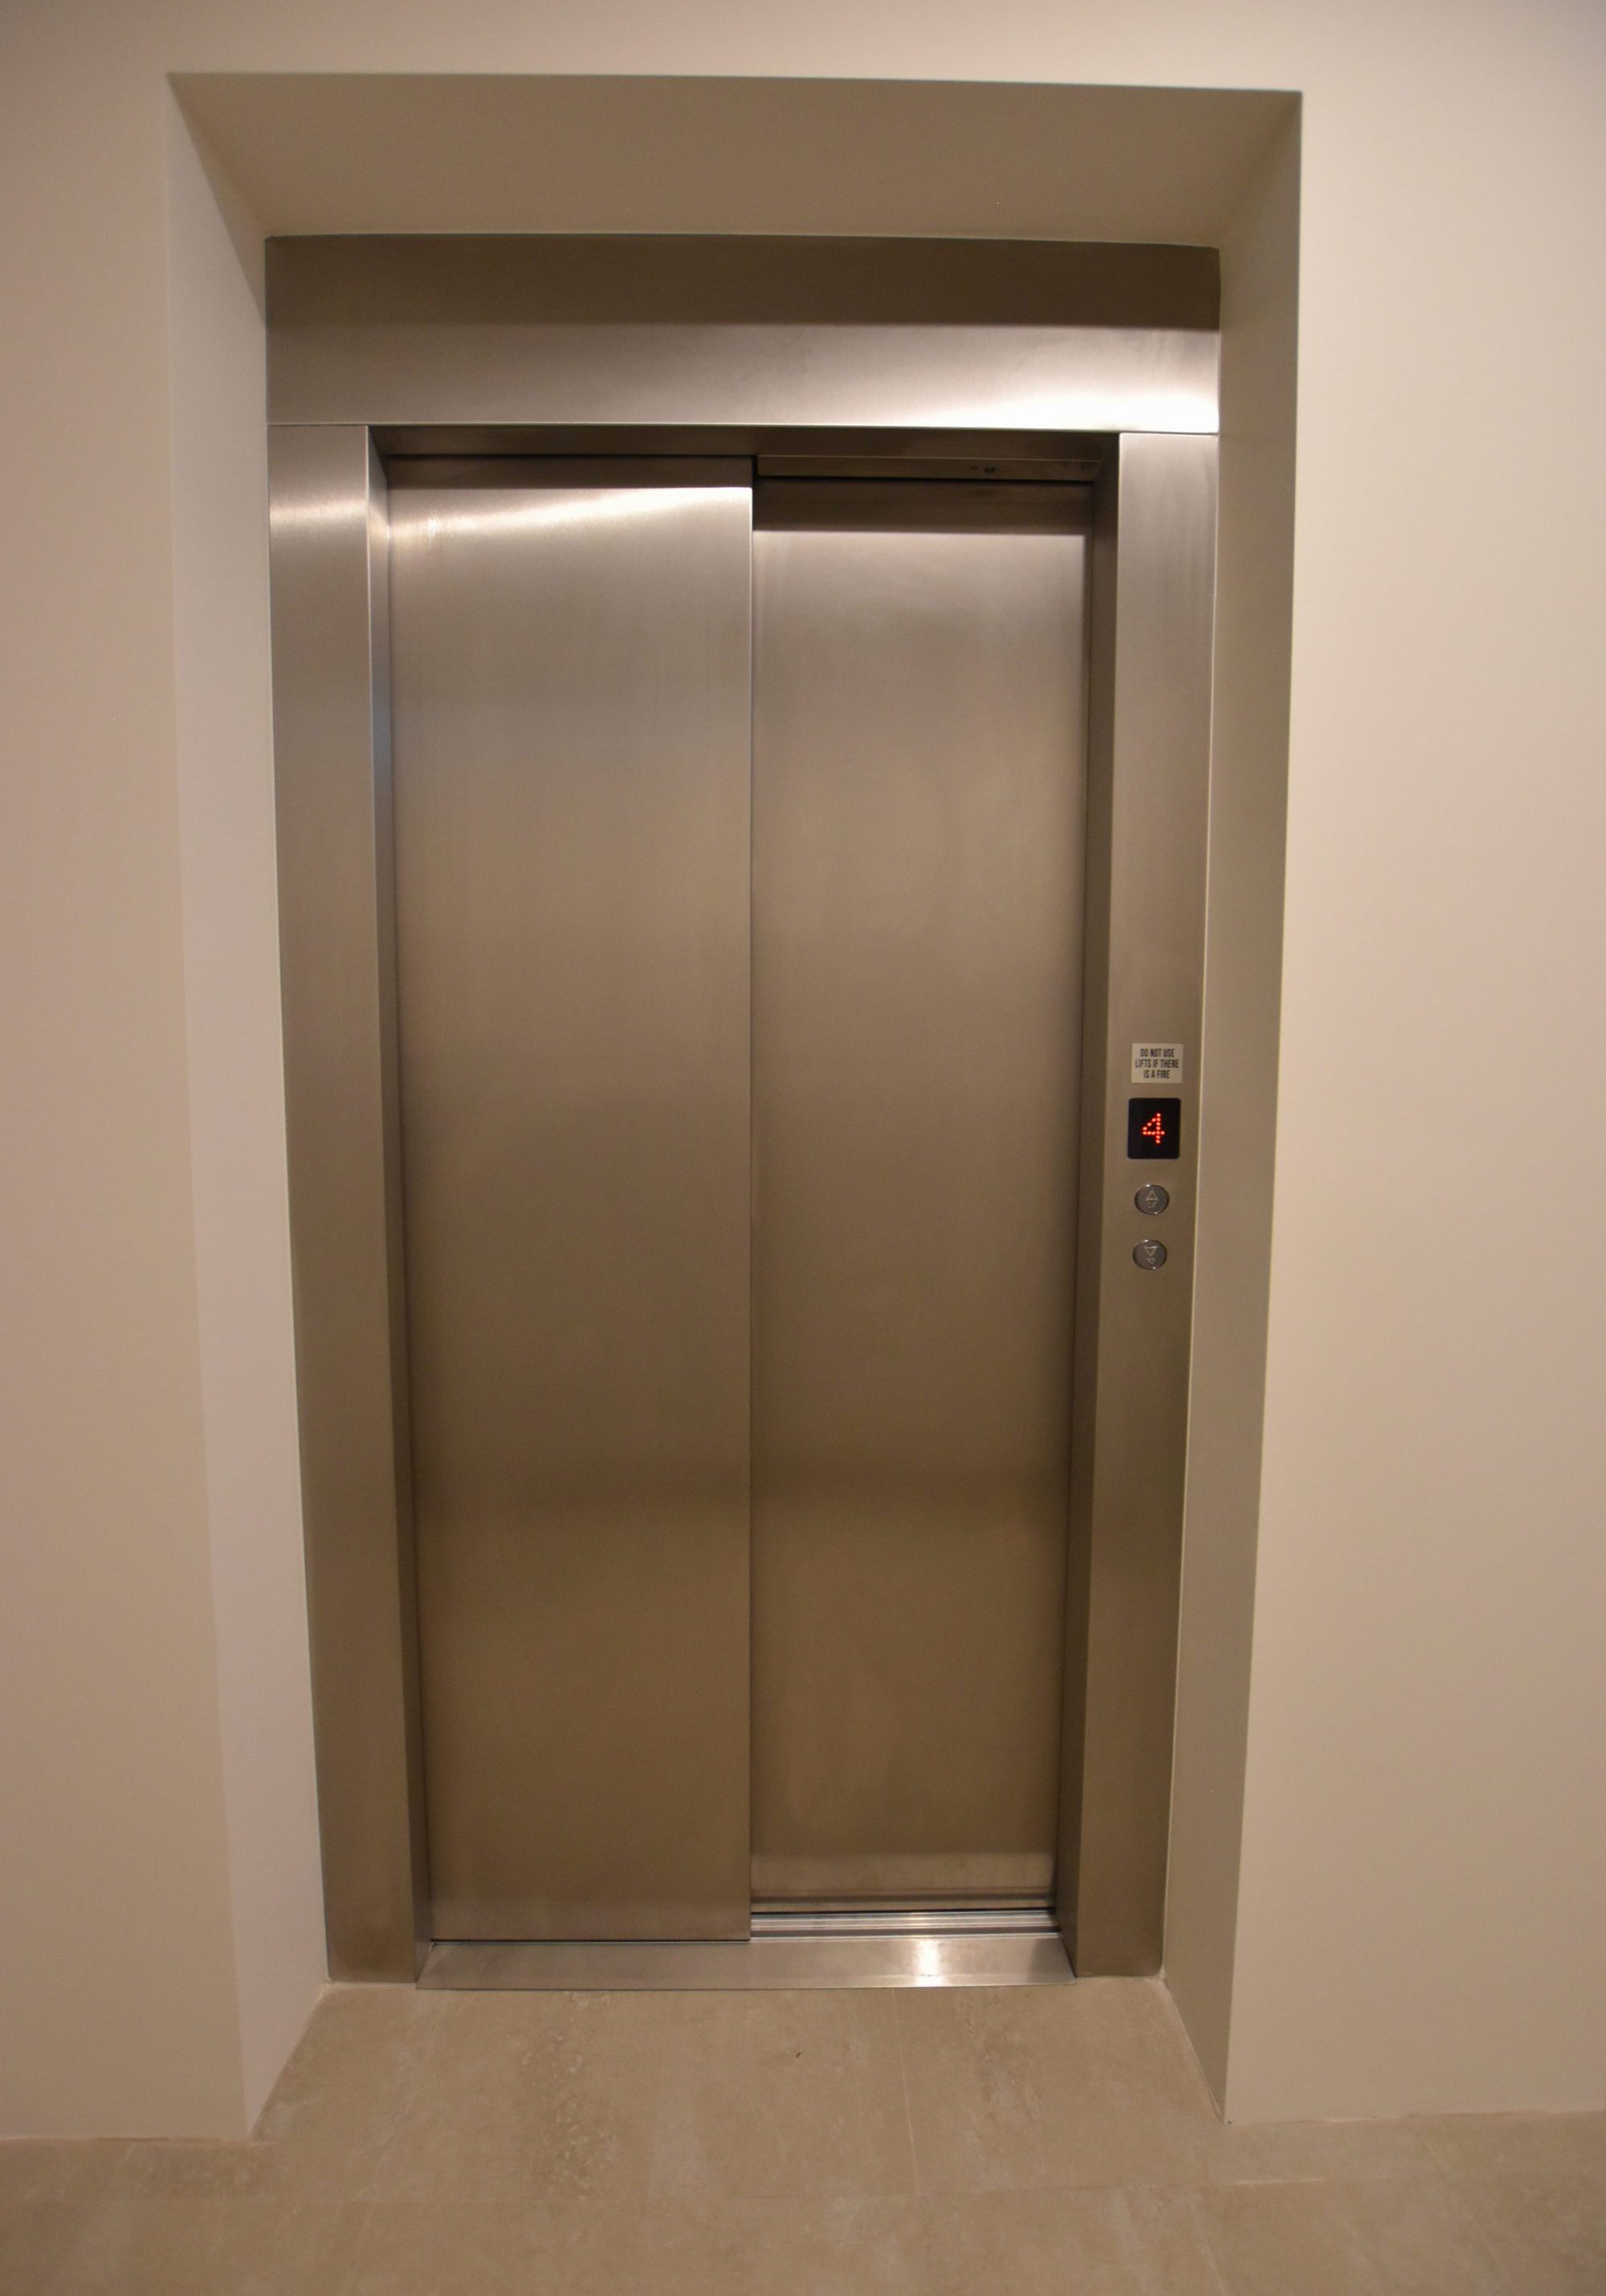 The steel door of the DDA compliant commercial lift that West Coast Elevators supplied and installed